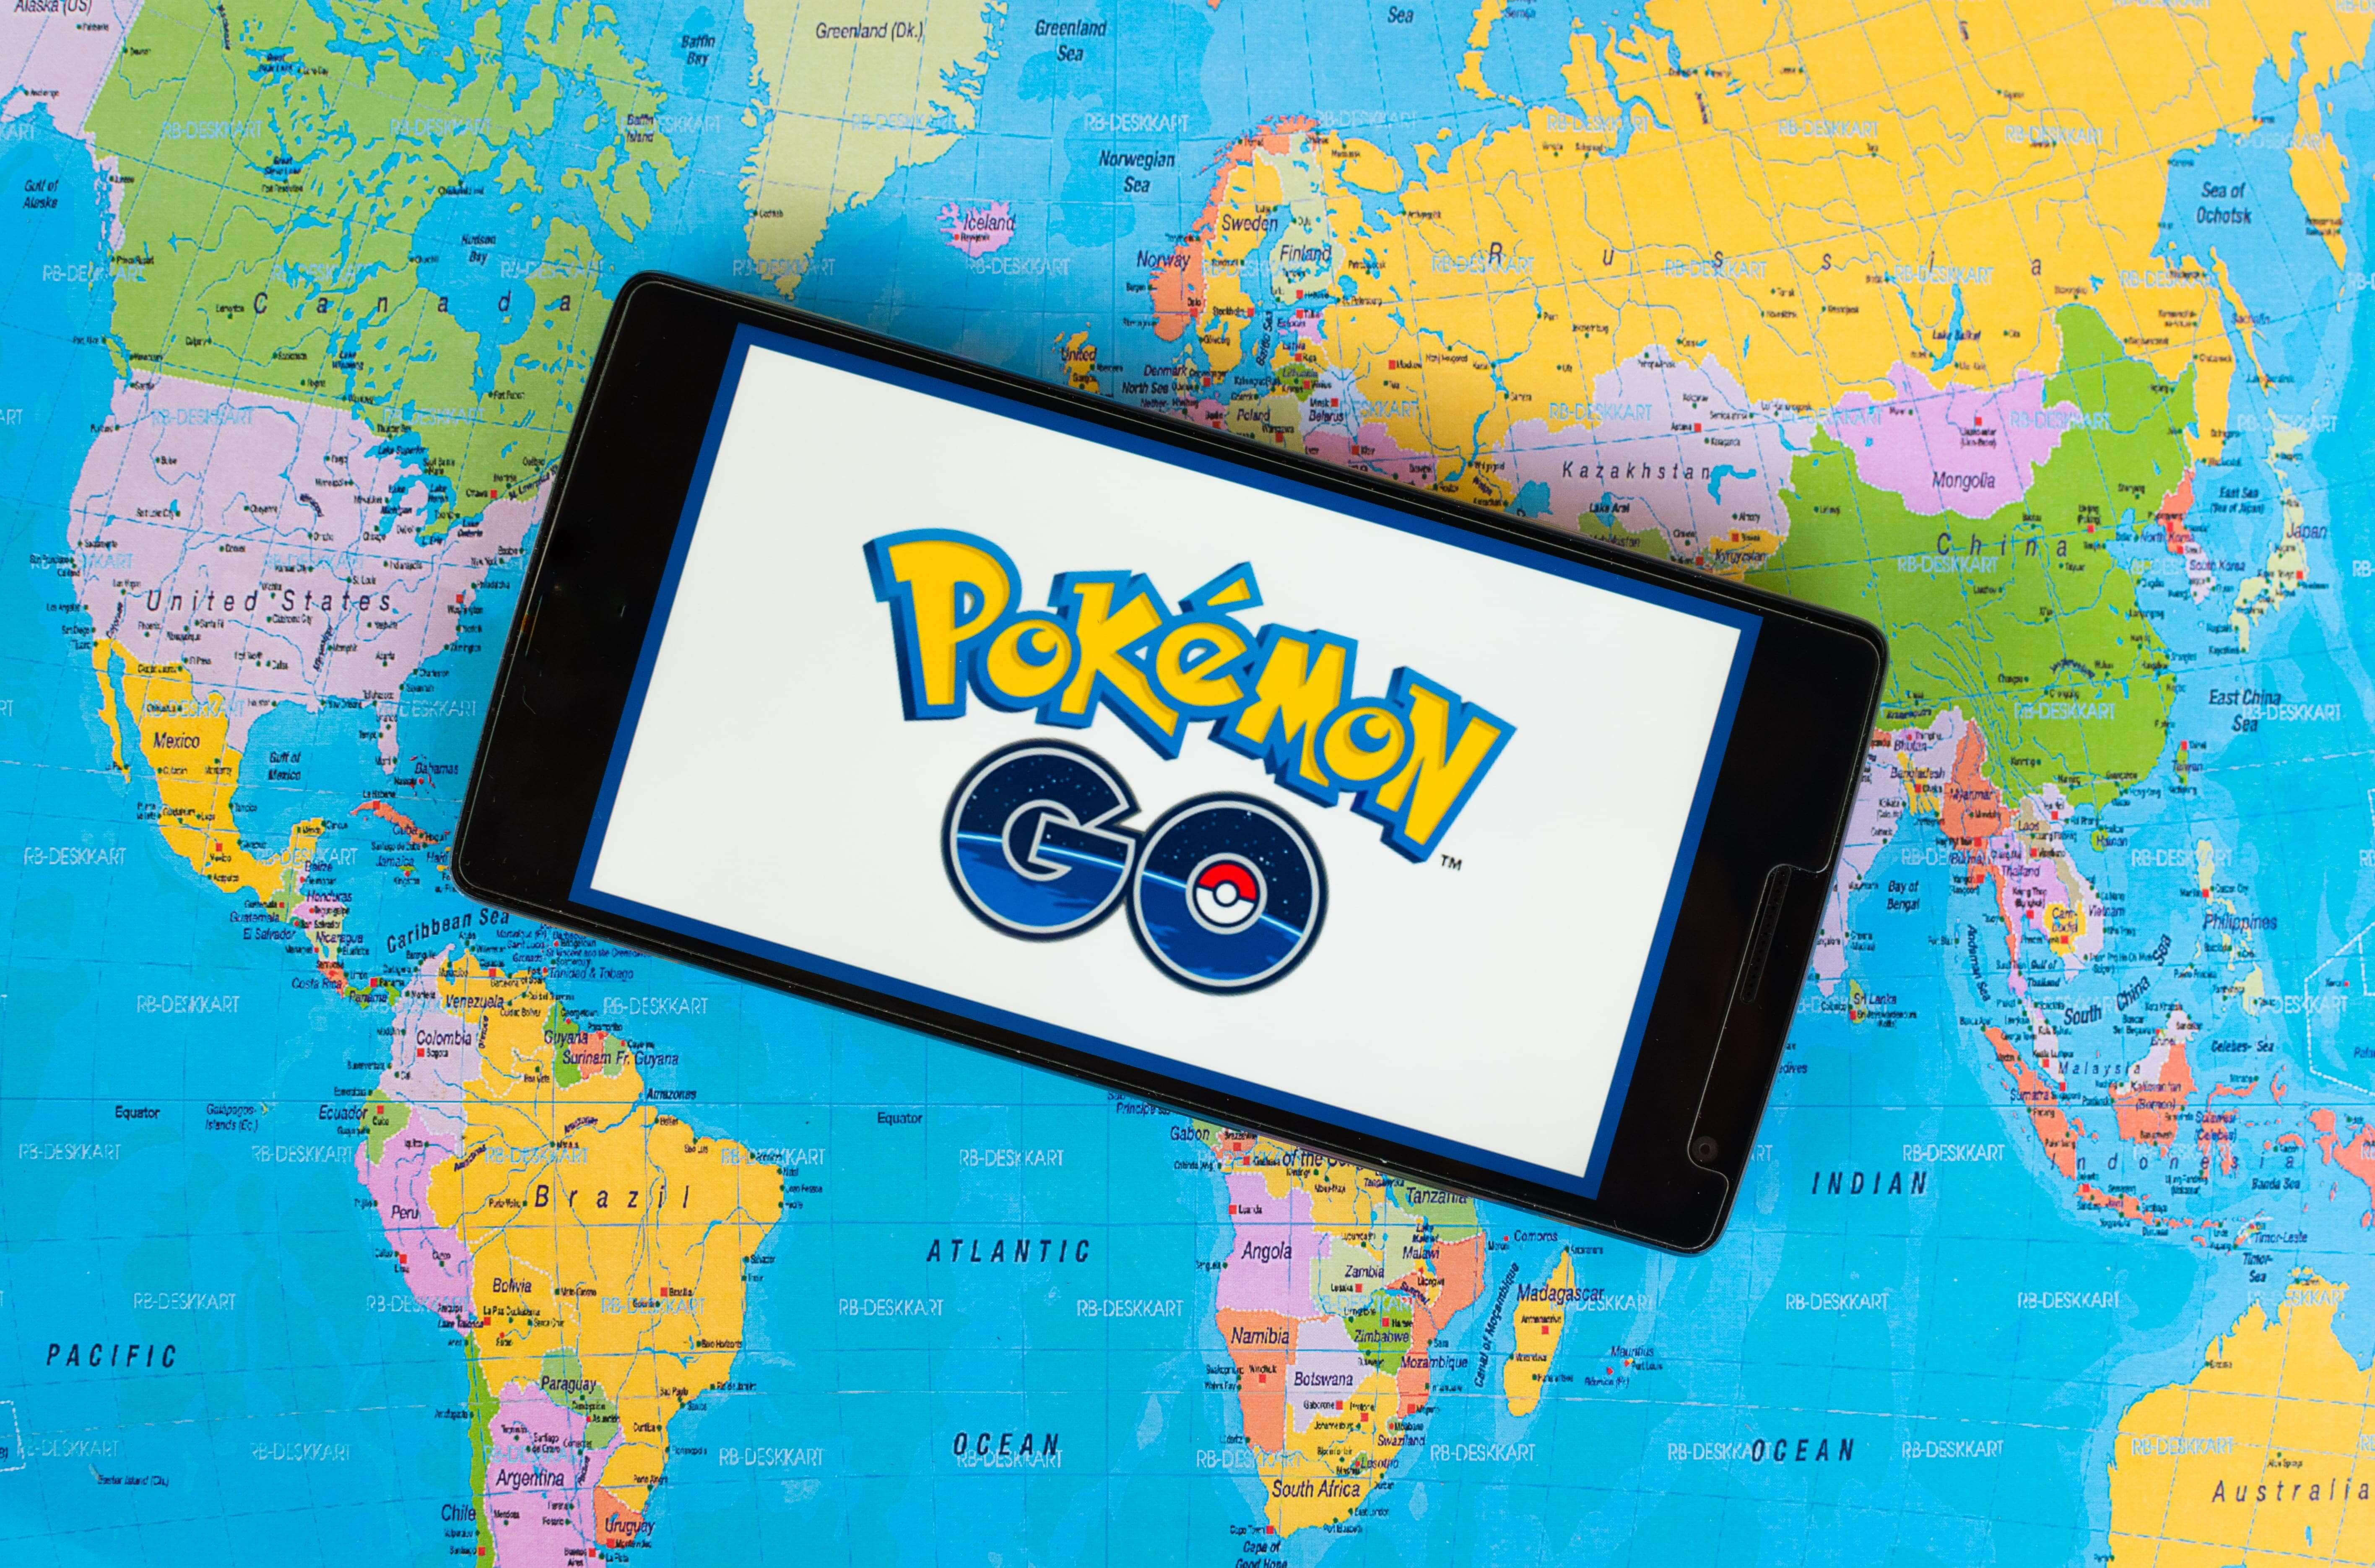 The Combined Power Of AR And Cellphones: How Pokémon Go Took The World By Storm